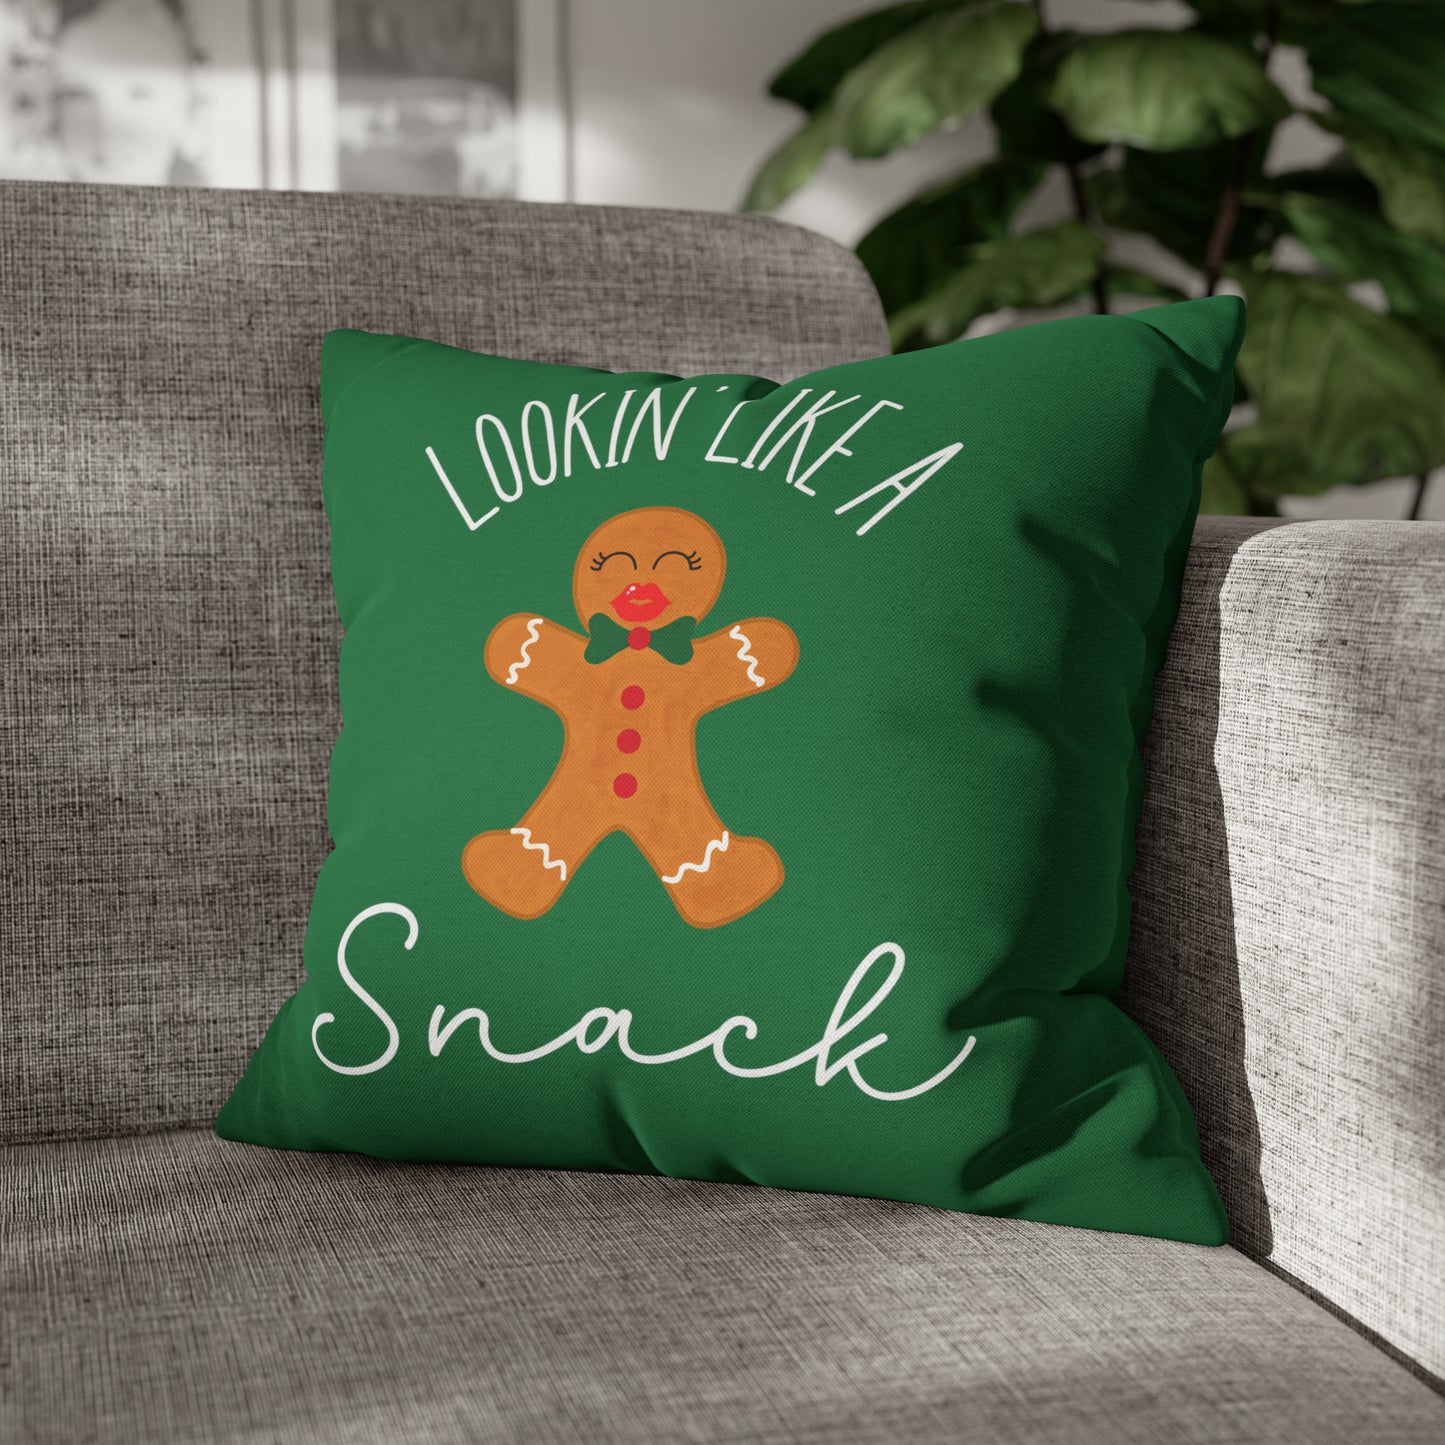 "Lookin' Like a Snack" Christmas Pillow Cover, Green